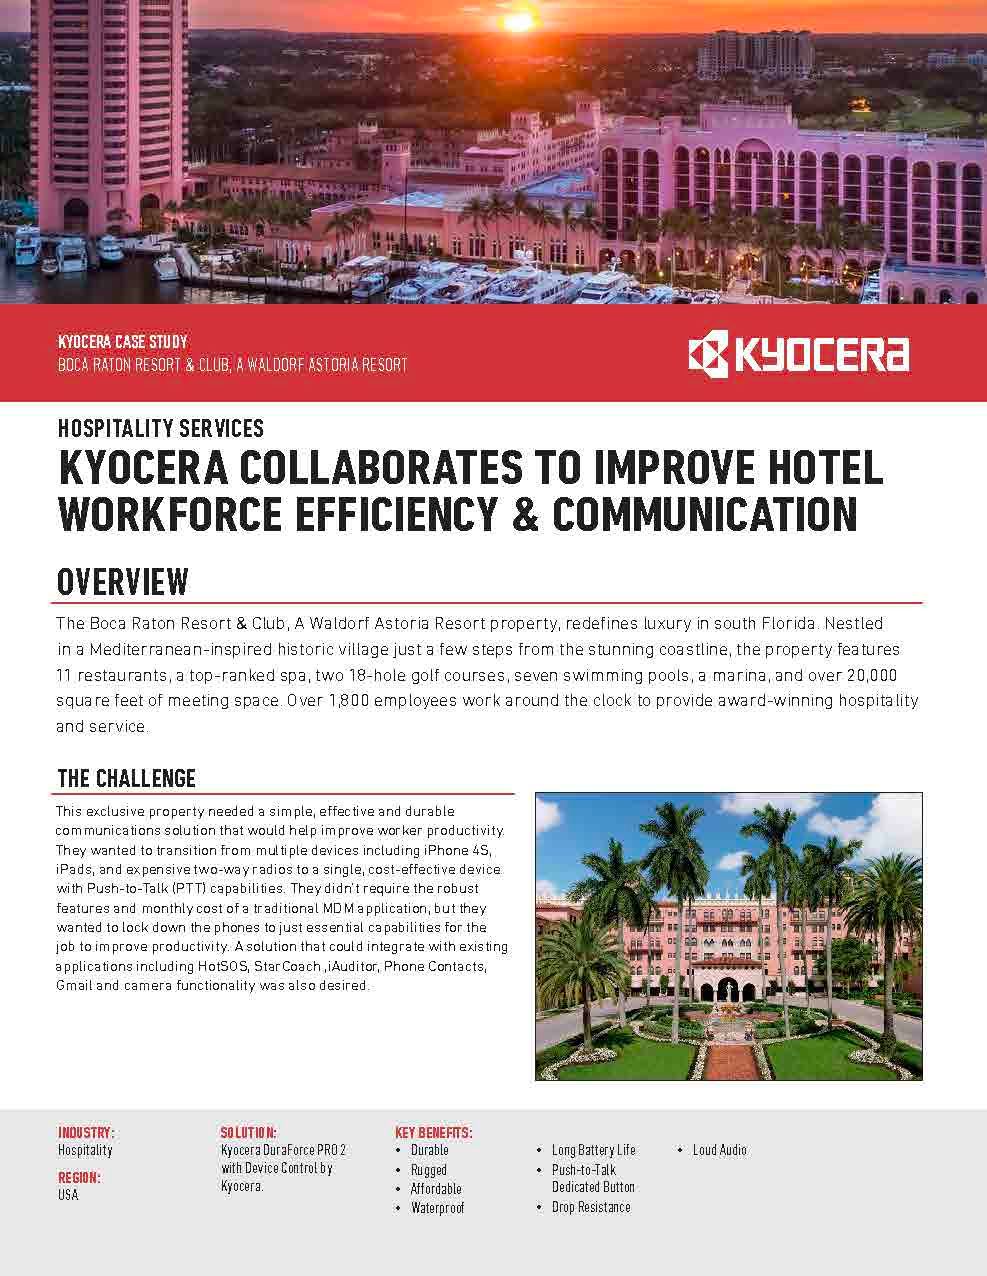 A brochure for kyocera collaborates to improve hotel workforce efficiency and communication.